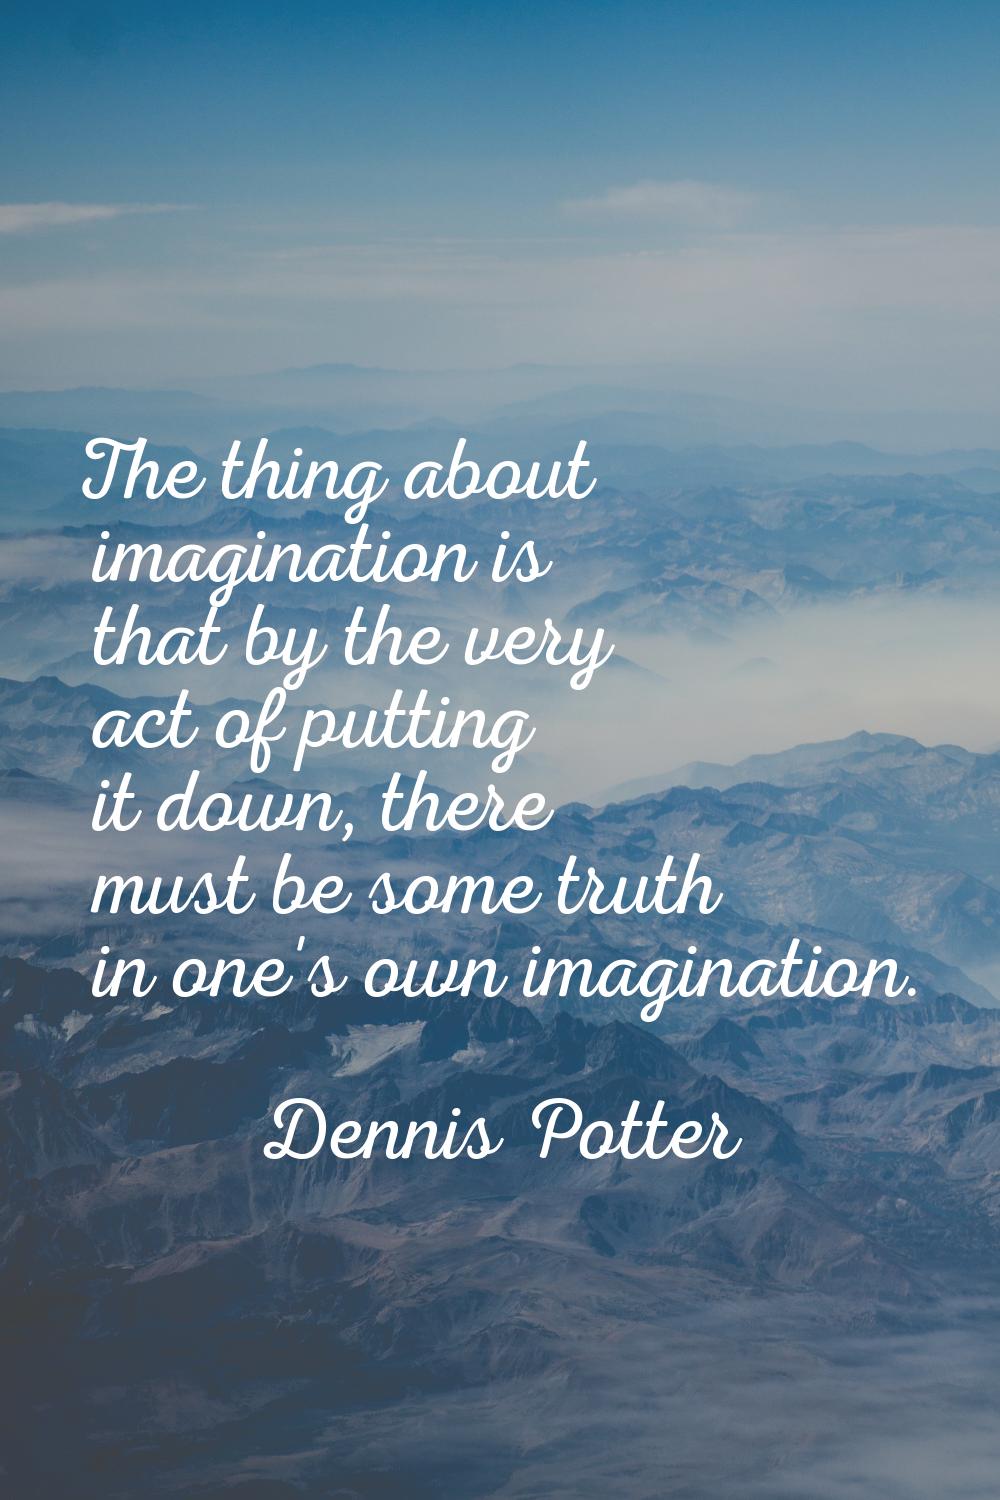 The thing about imagination is that by the very act of putting it down, there must be some truth in